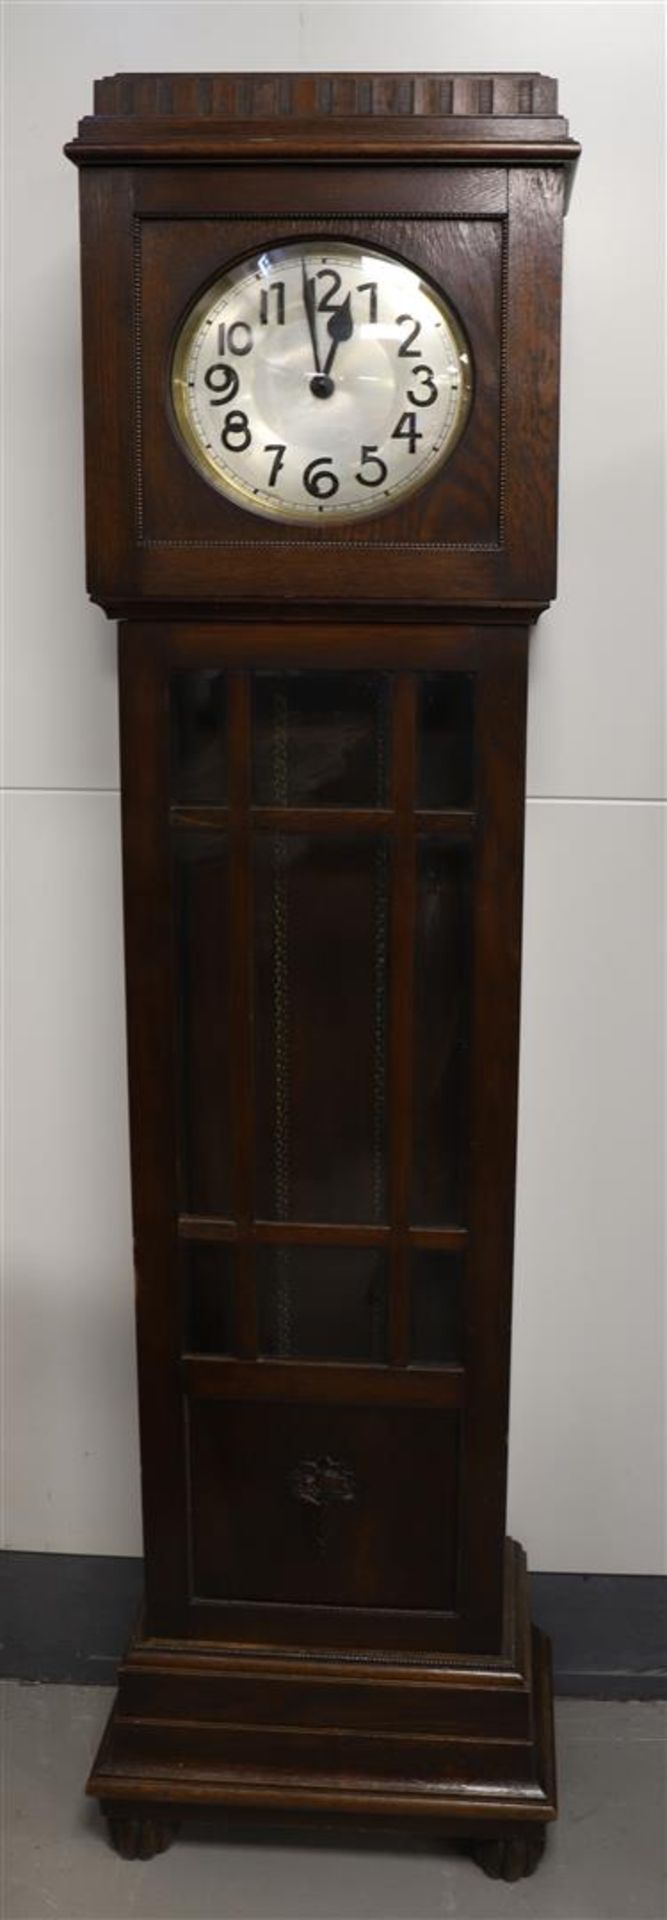 A grandfather clock, Germany, ca. 1930. Oak casing, copper dial with Arabic numerals, weights and